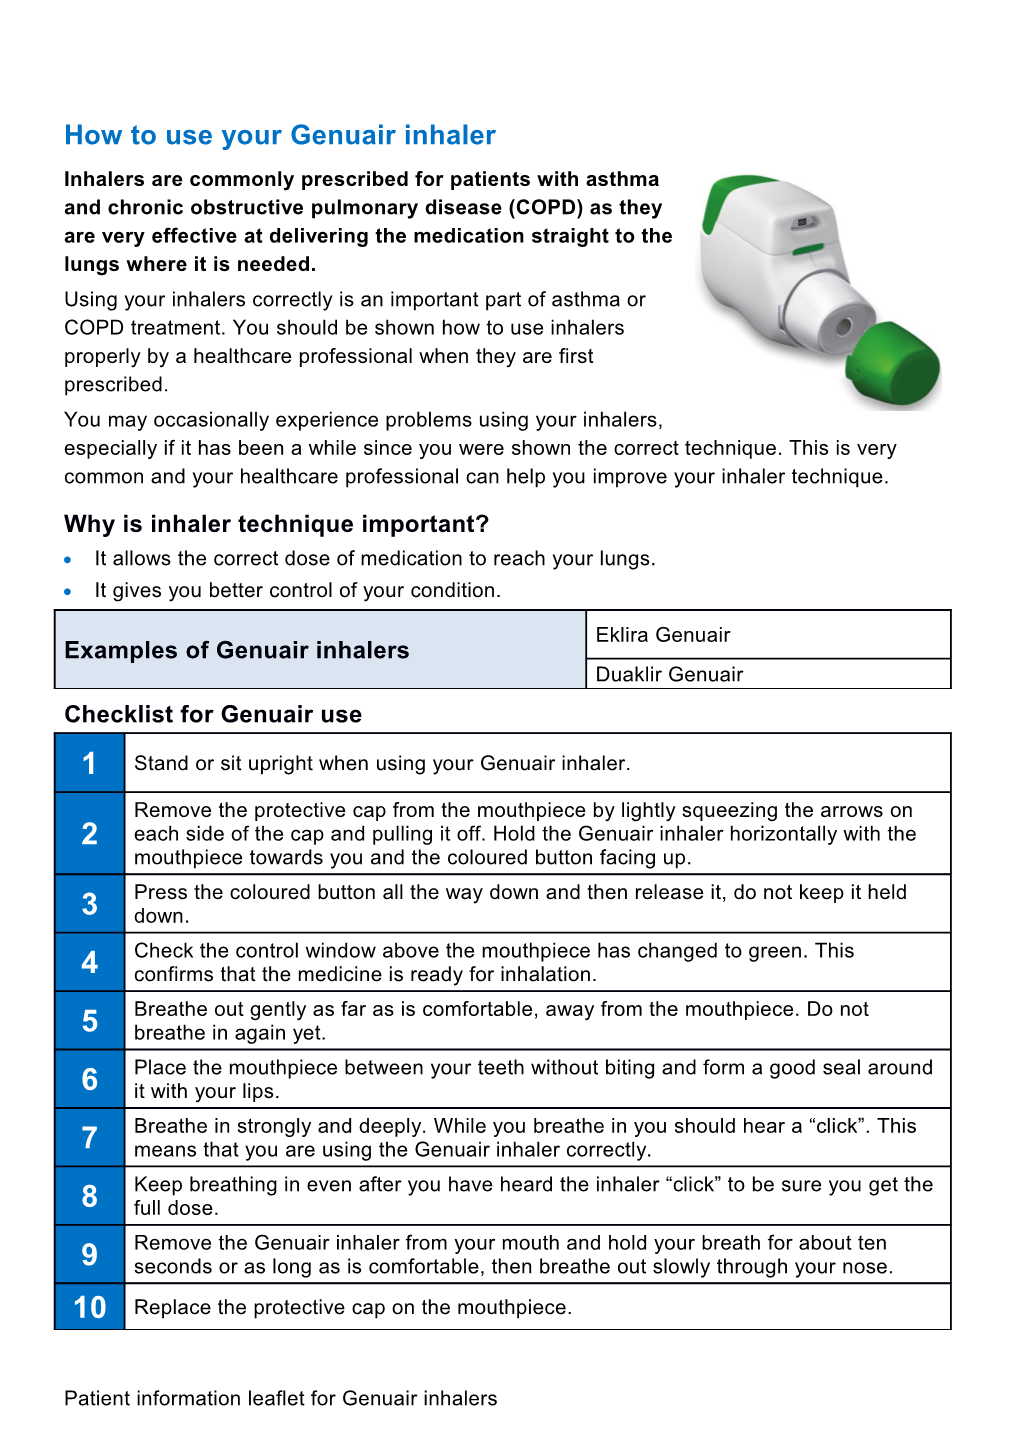 How to Use Your Genuair Inhaler